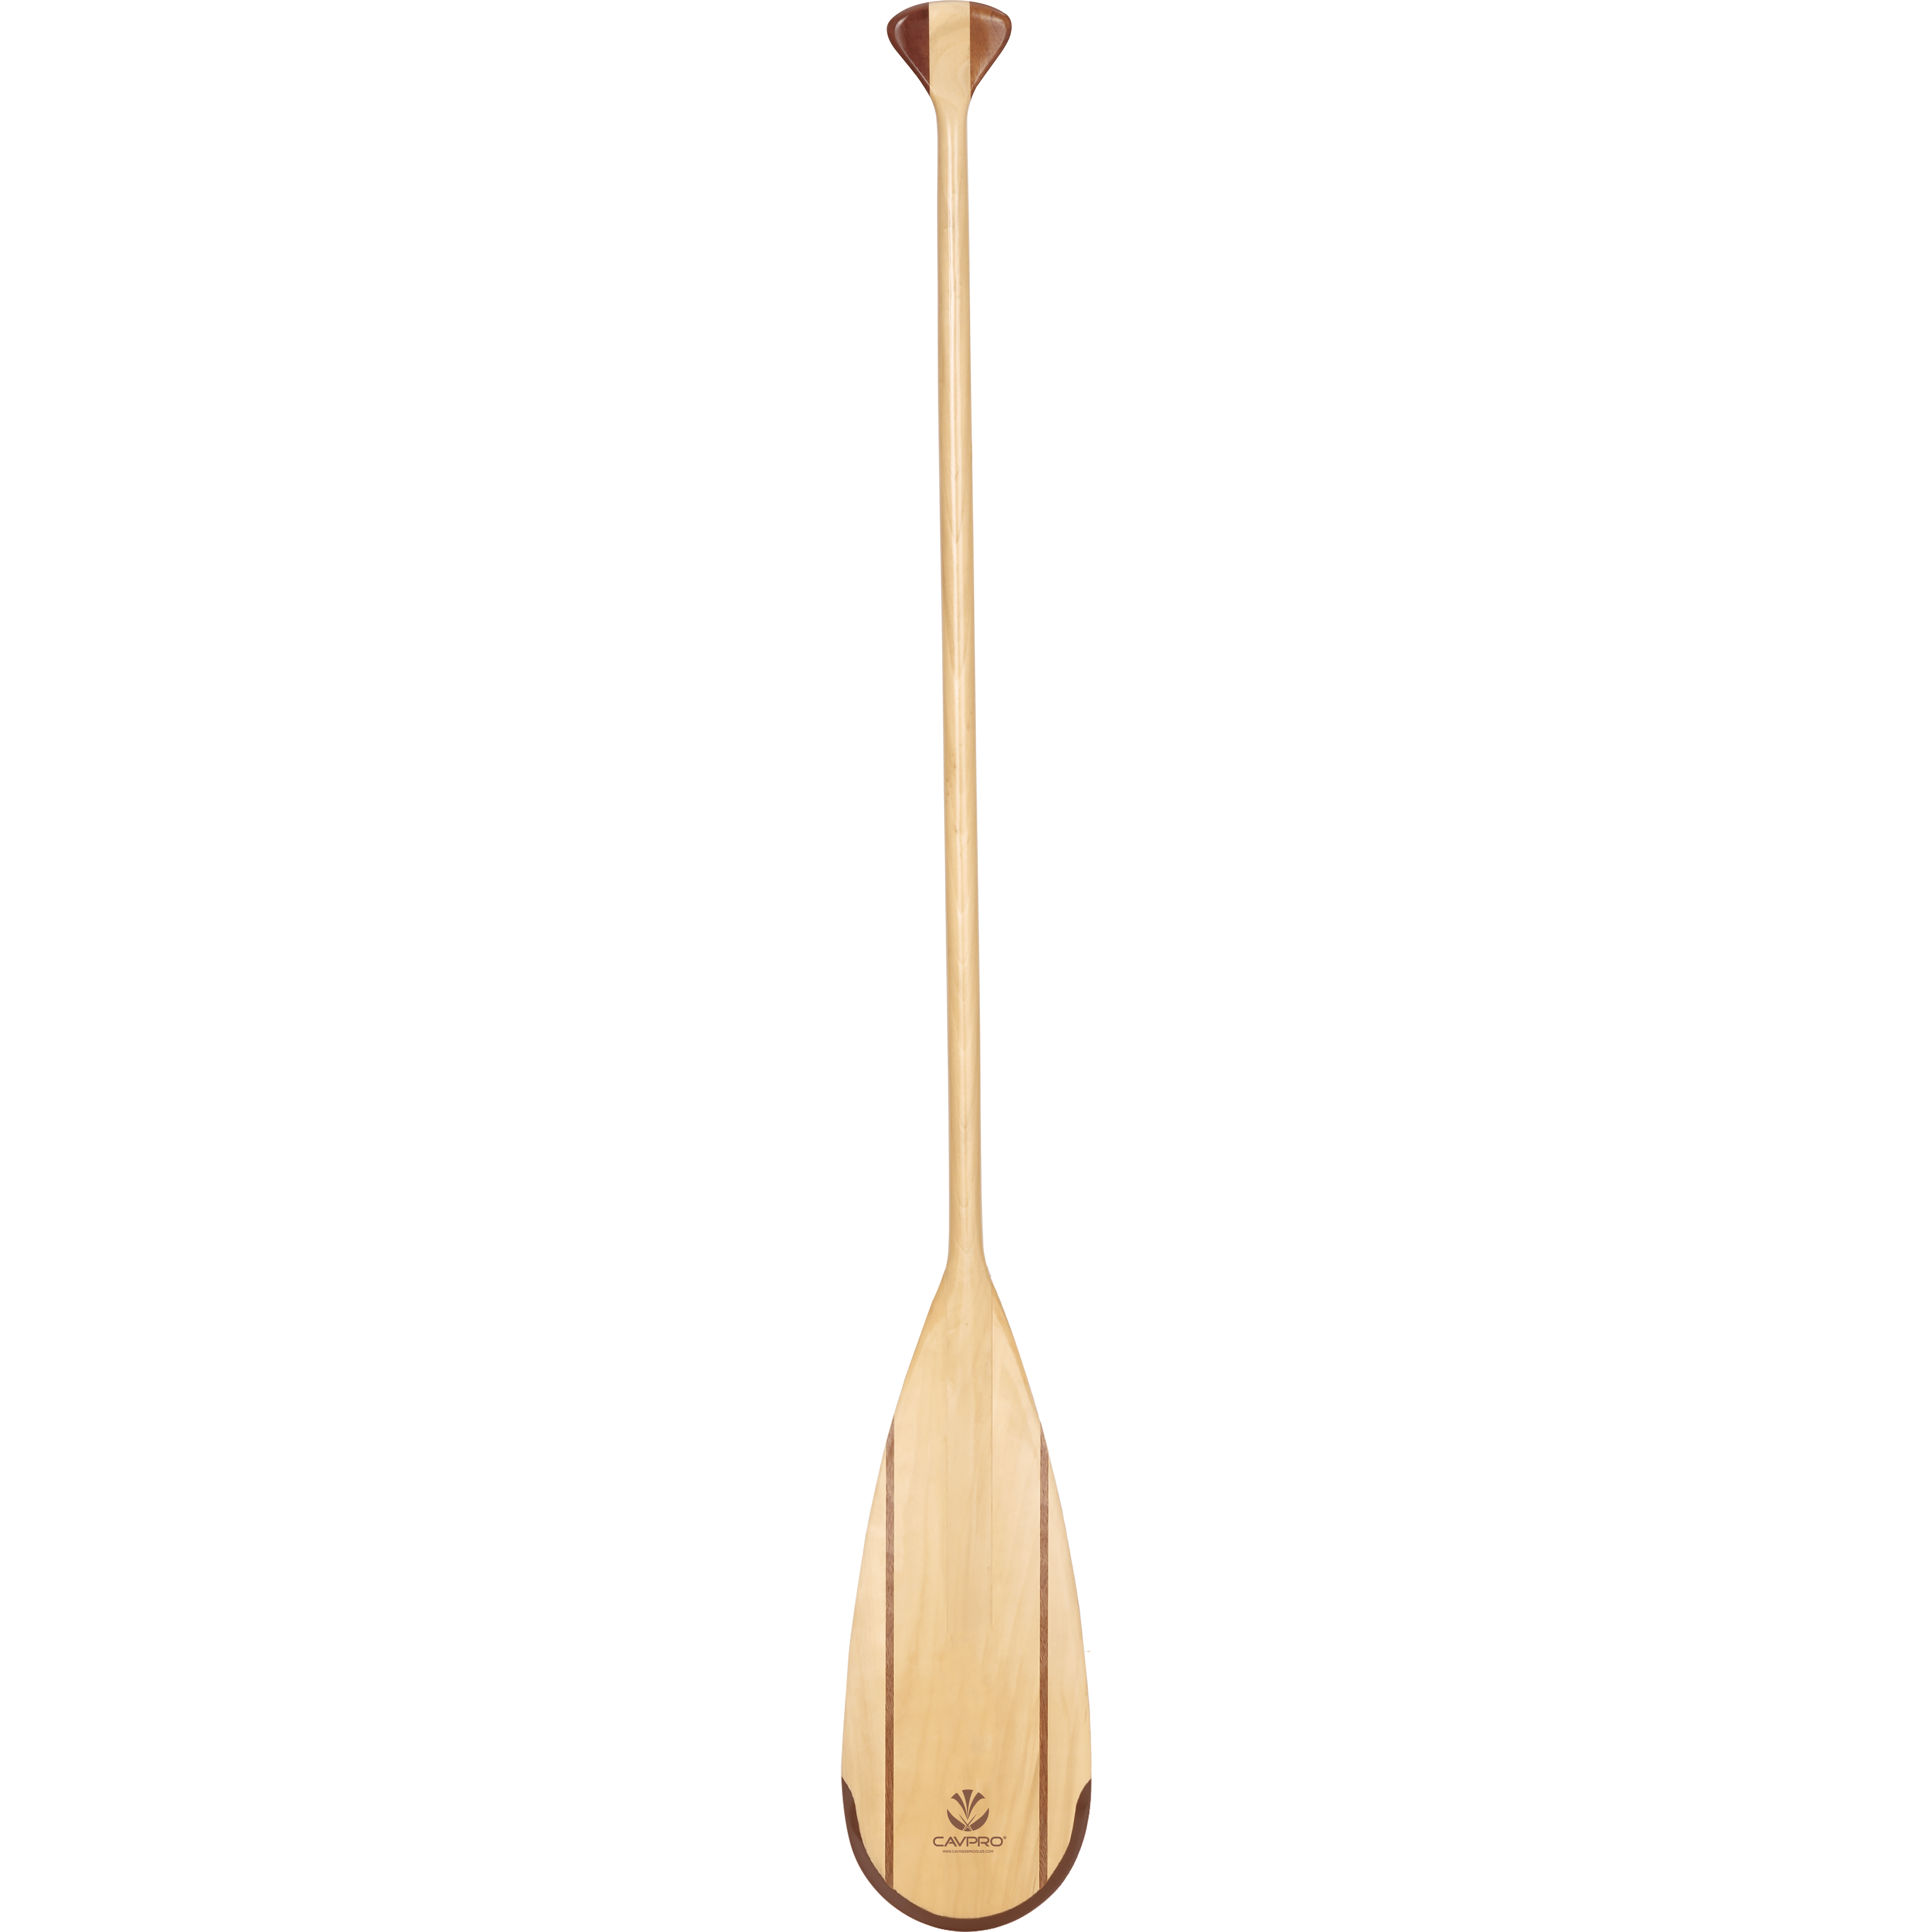 51in Paddle of Caviness Cavpro Resin Tip Canoe Paddle